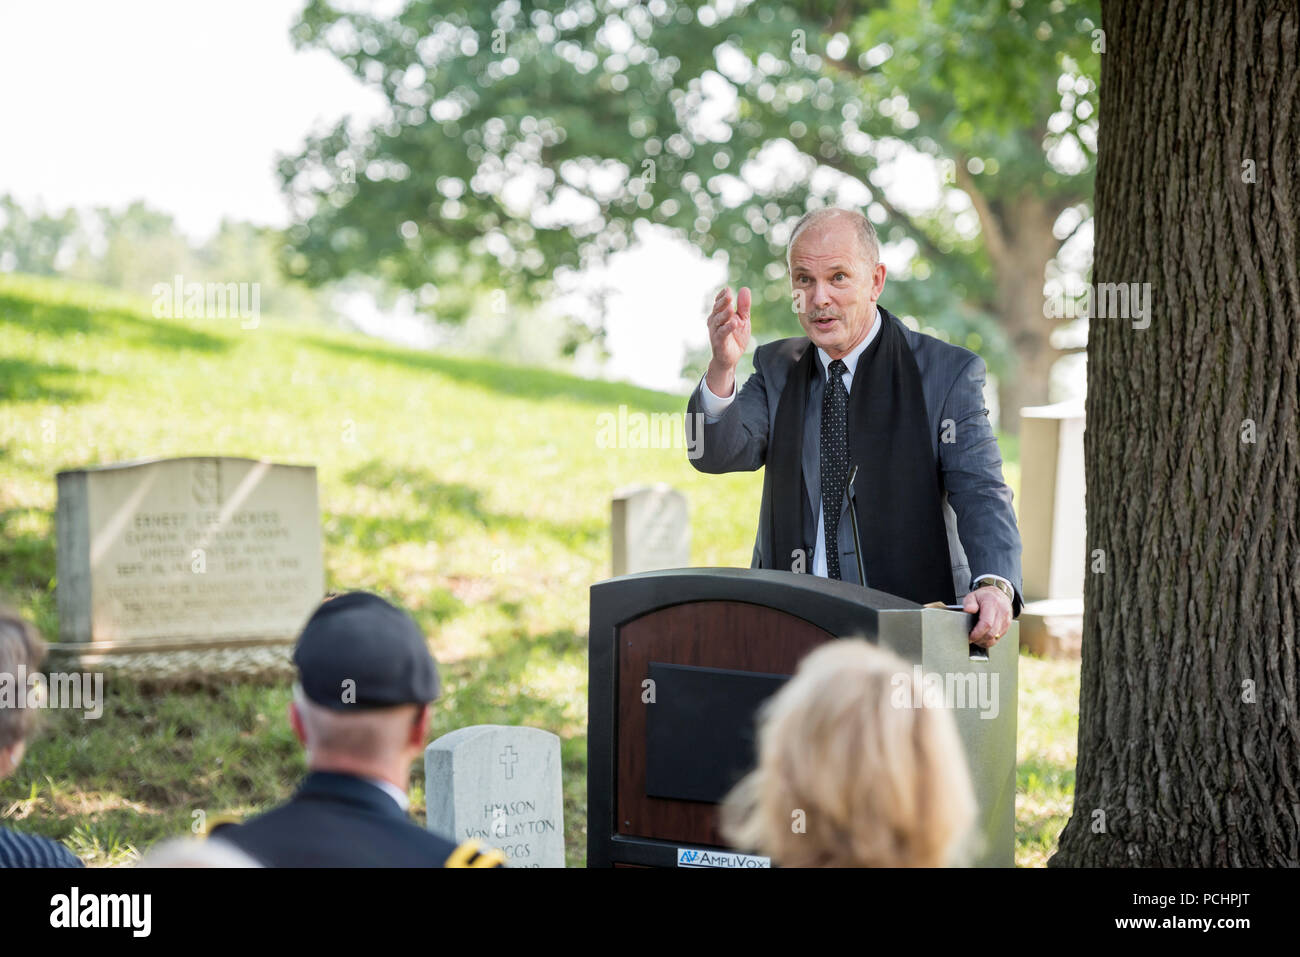 Chap. (Col.) Kenneth Sampson (ret.) gives remarks as the keynote speaker during a ceremony in honor of the 243rd U.S. Army Chaplain Corps Anniversary at Chaplains Hill in Section 2 of Arlington National Cemetery, Arlington, Virginia, July 27, 2018.  A wreath was laid at Chaplains Hill by Chaplain (Maj. Gen.) Paul K. Hurley, chief of chaplains, U.S. Army Chaplain Corps, and Sgt. Maj. Ralph Martinez, regimental sergeant major, U.S. Army Chaplain Corps.  (U.S. Army photo by Elizabeth Fraser / Arlington National Cemetery / released) (Photo was taken in color and turned to black-and-white) Stock Photo